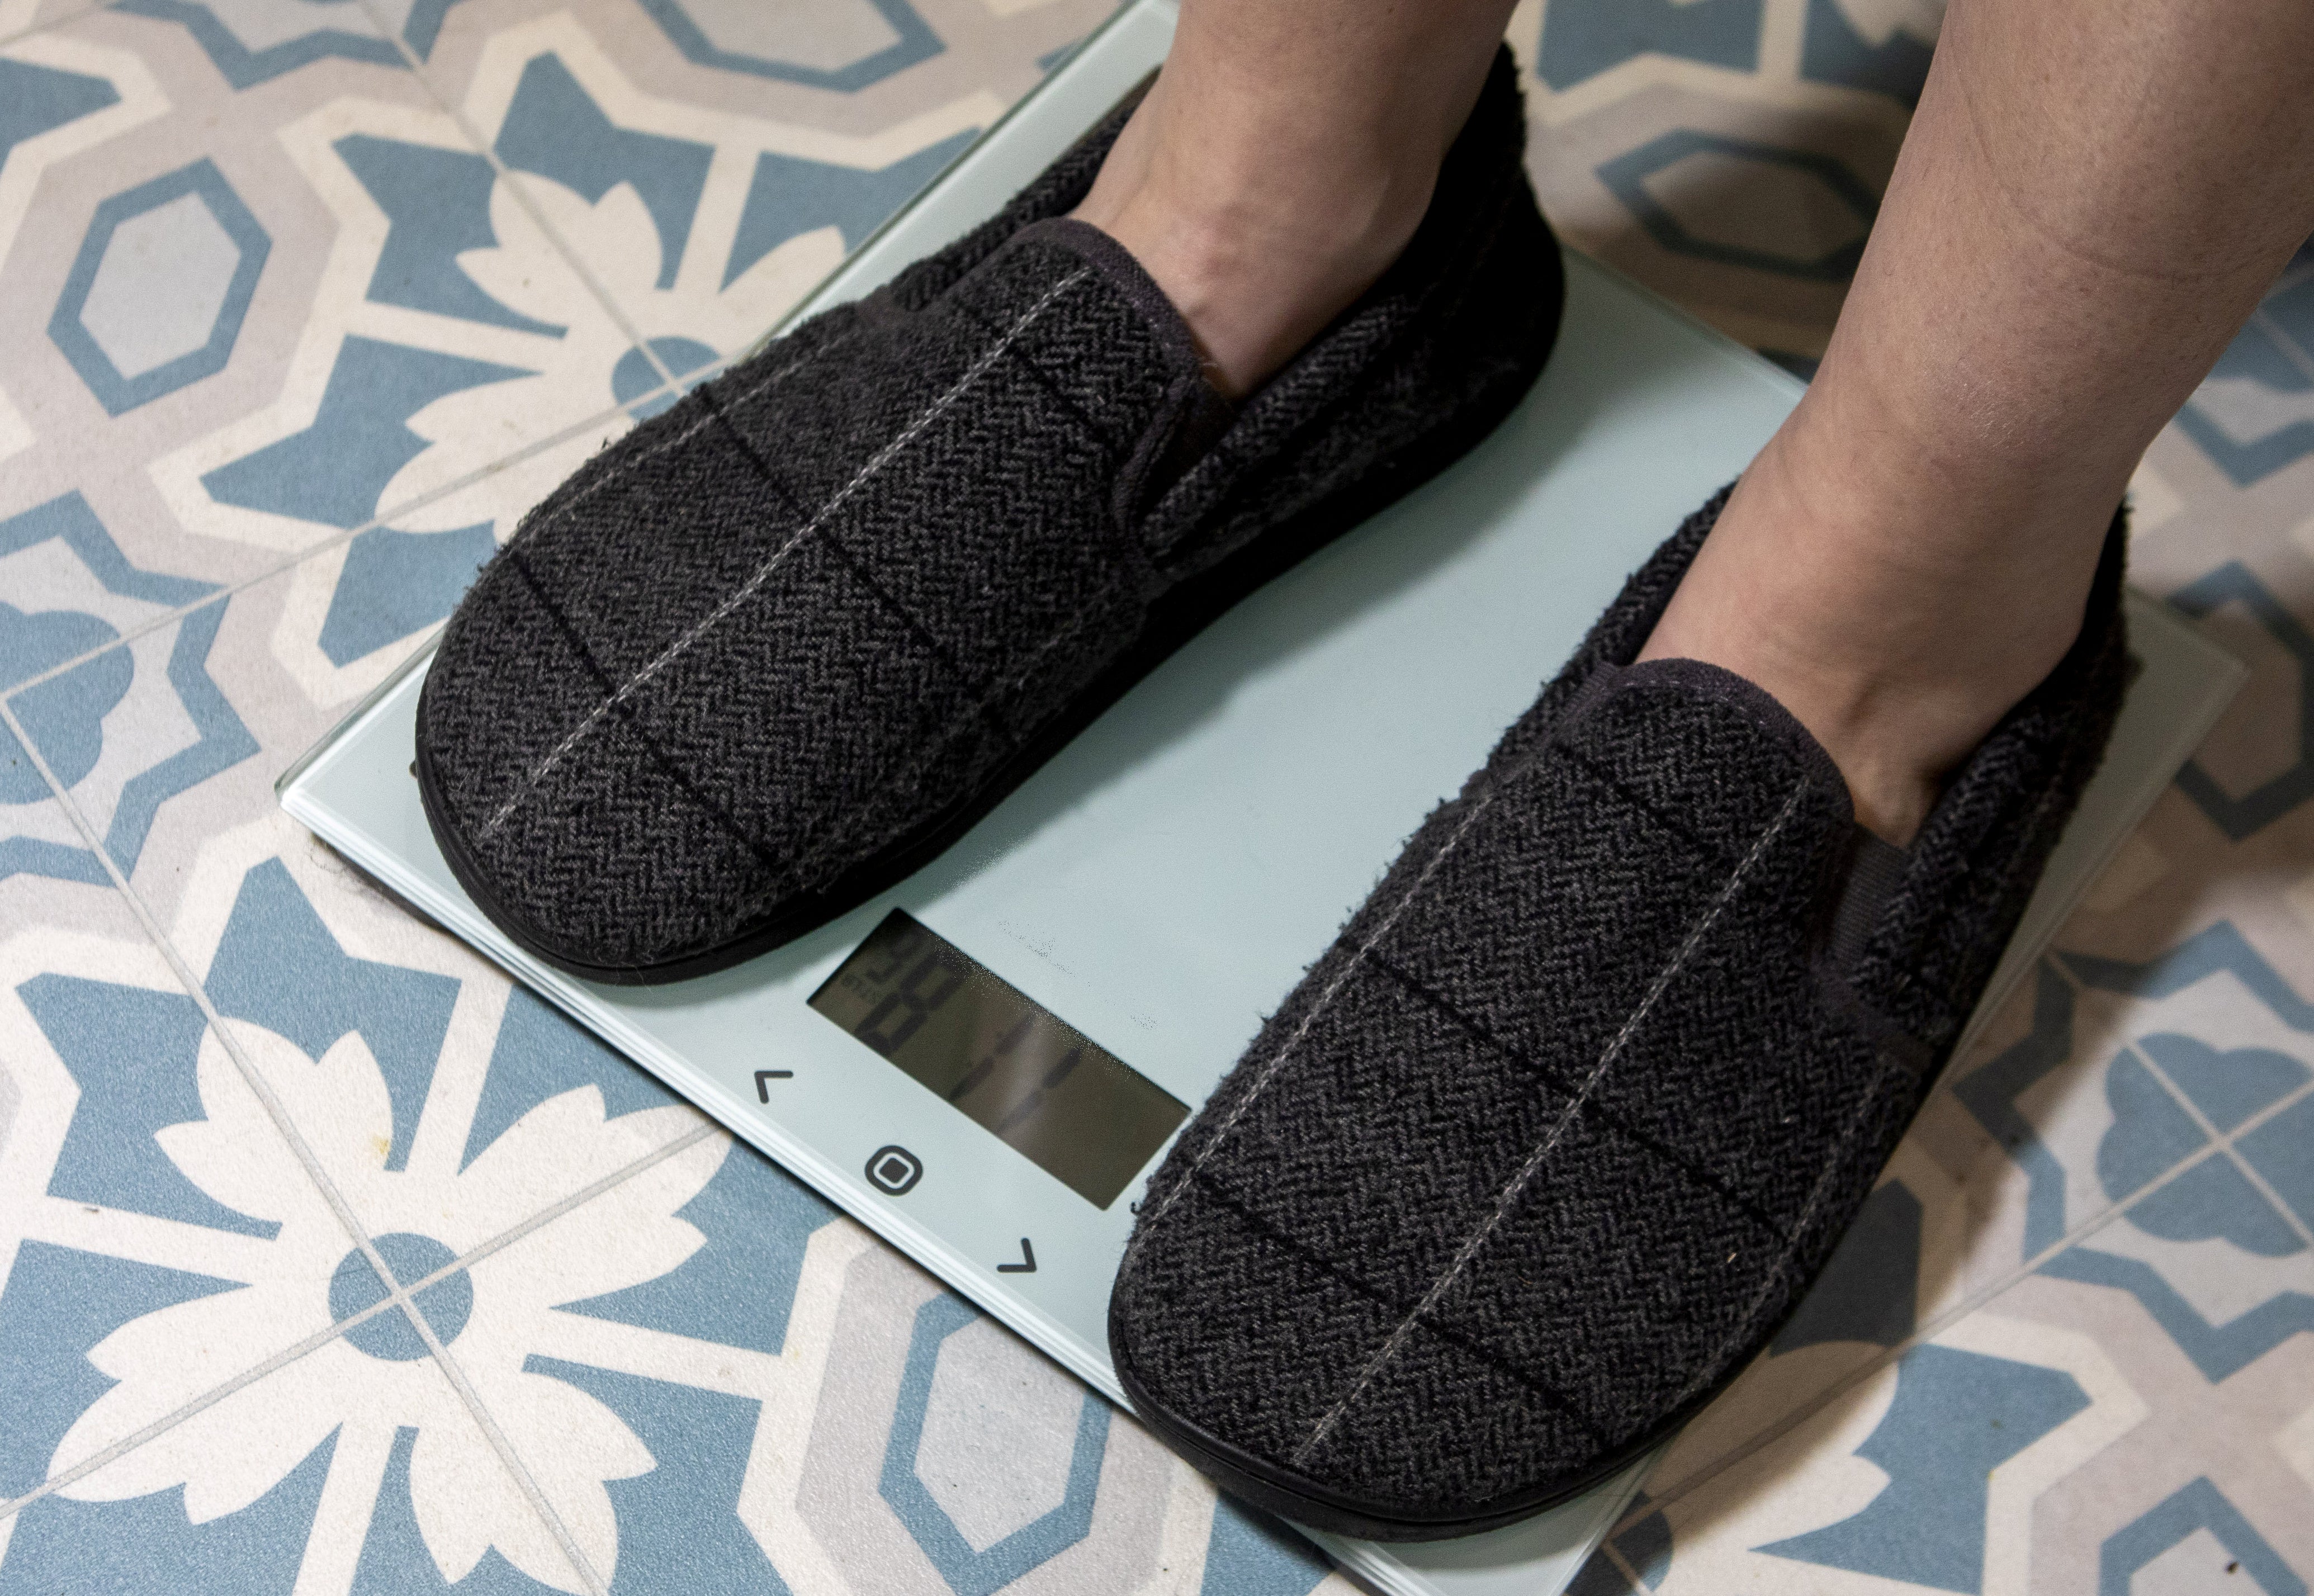 A study found that fears of being judged has led many people to lose weight ‘in secret’